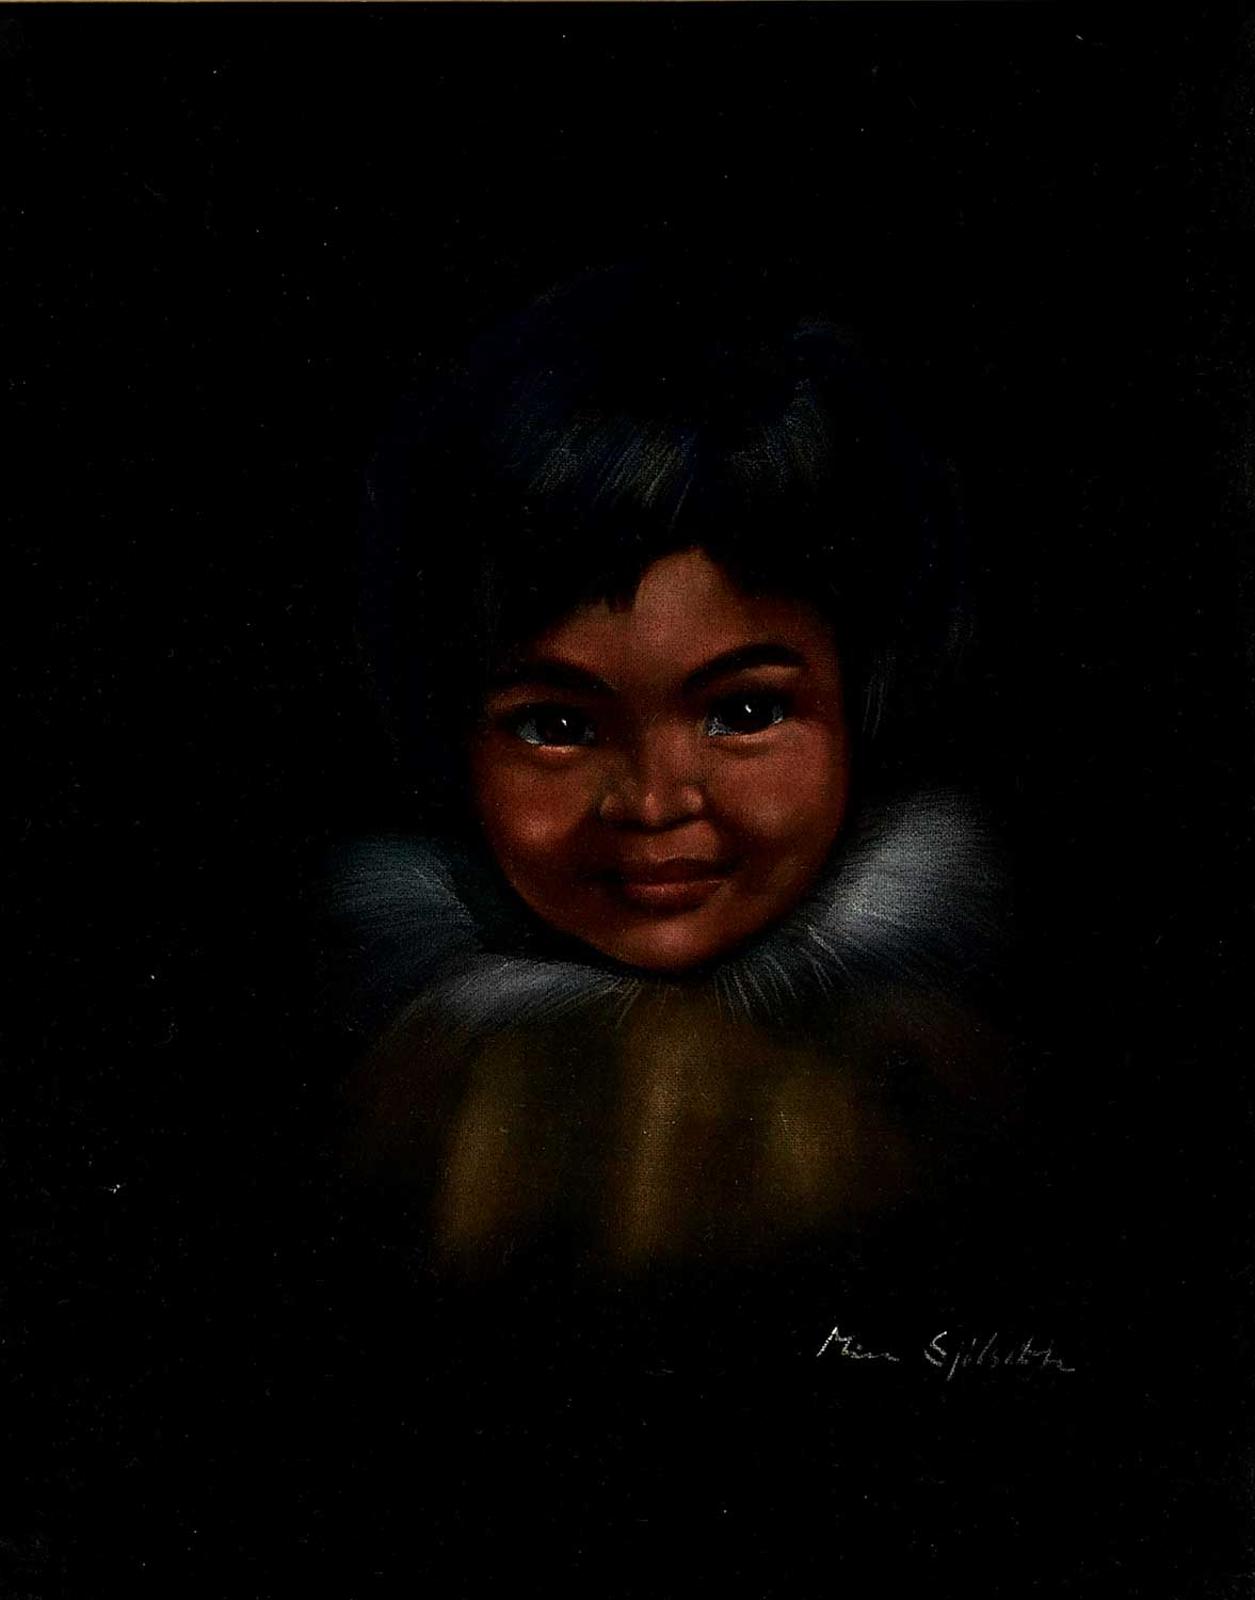 Minnie Sjolseth-Carter - Untitled - Portrait of an Inuit Child